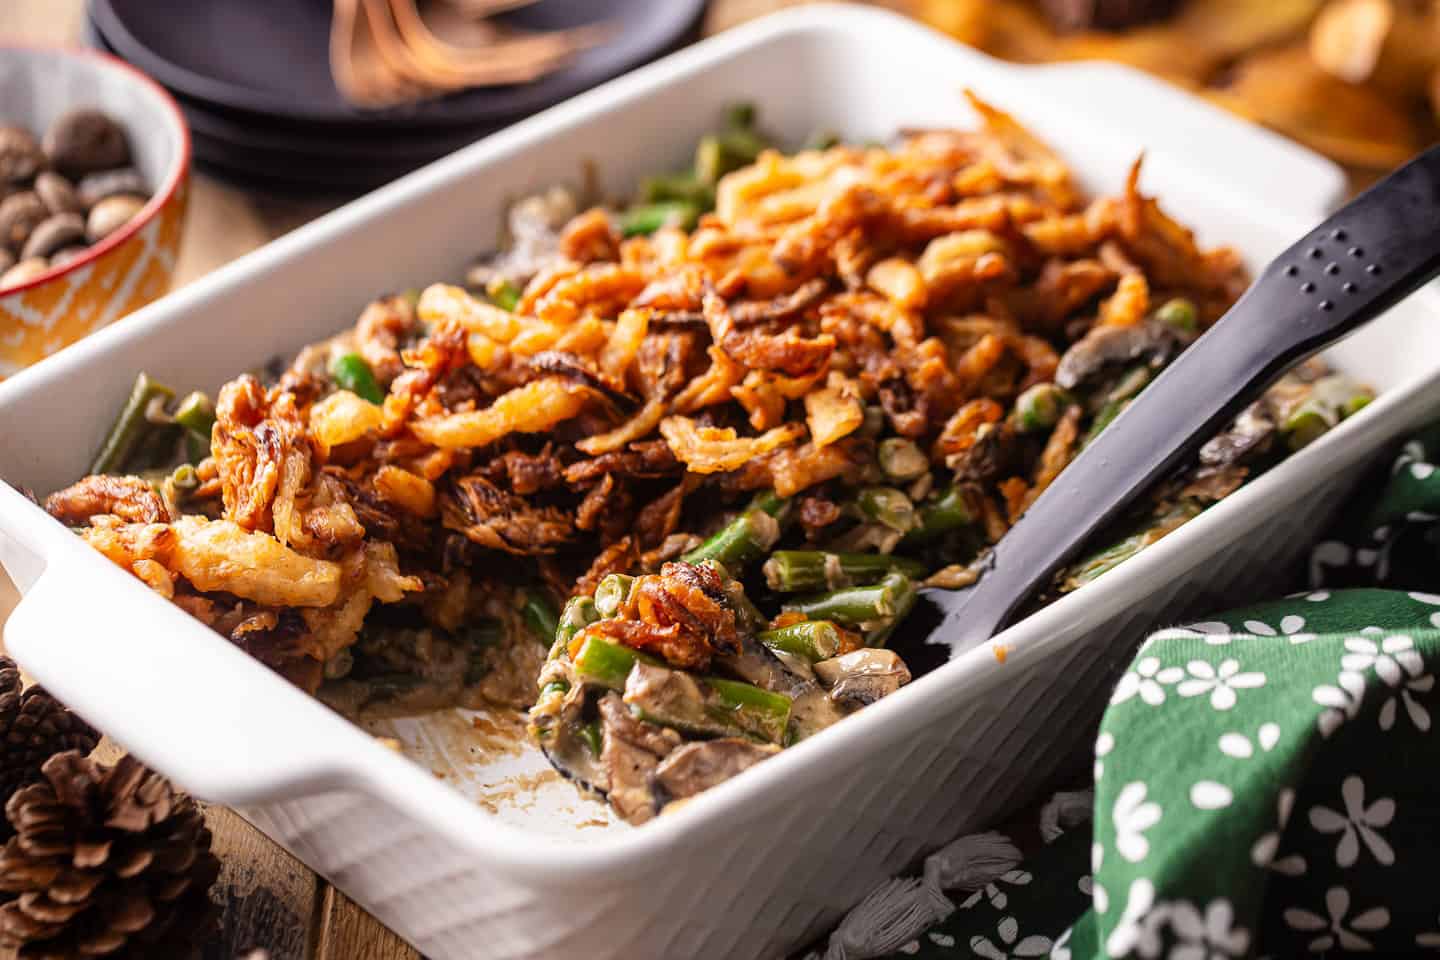 Best green bean casserole recipe with fresh green beans and crunchy fried onion topping.